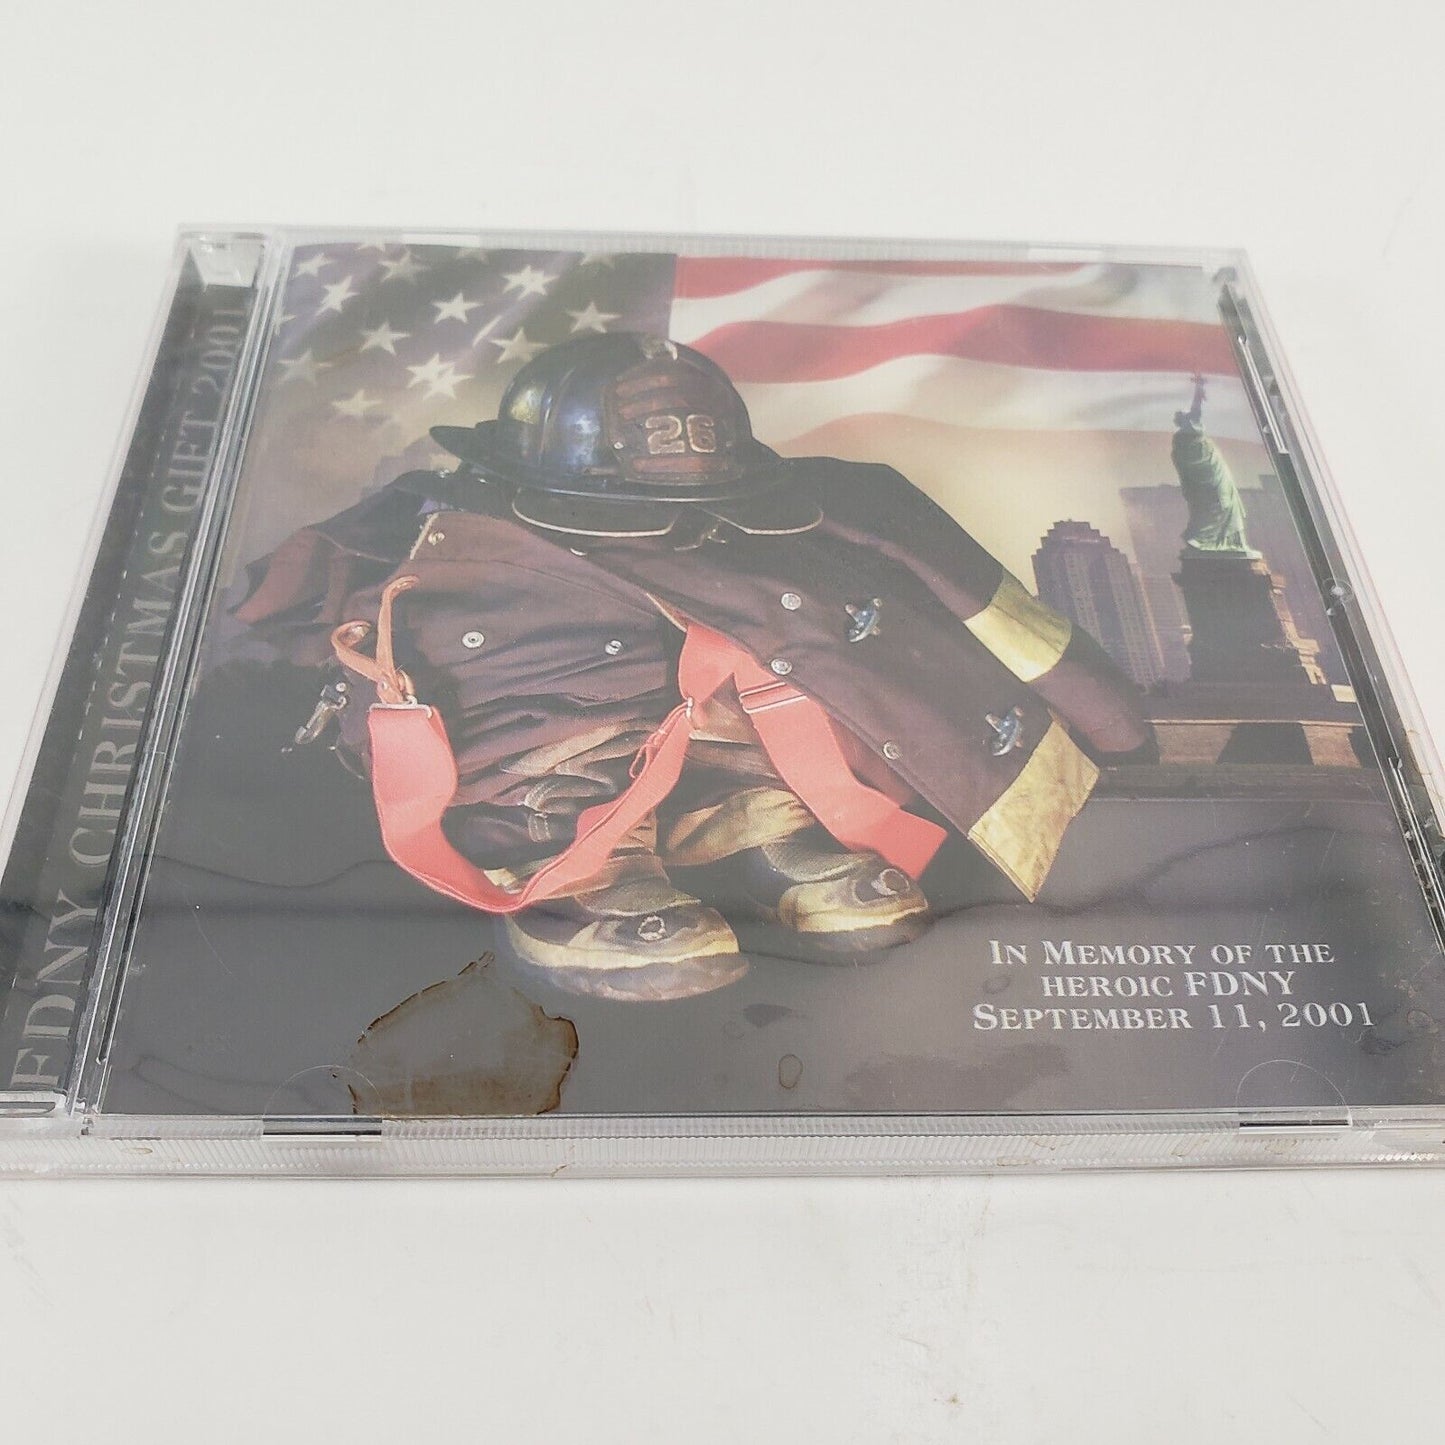 FDNY Christmas Gift 2001 CD Holiday Music In Memory of the Heroic FDNY Sealed